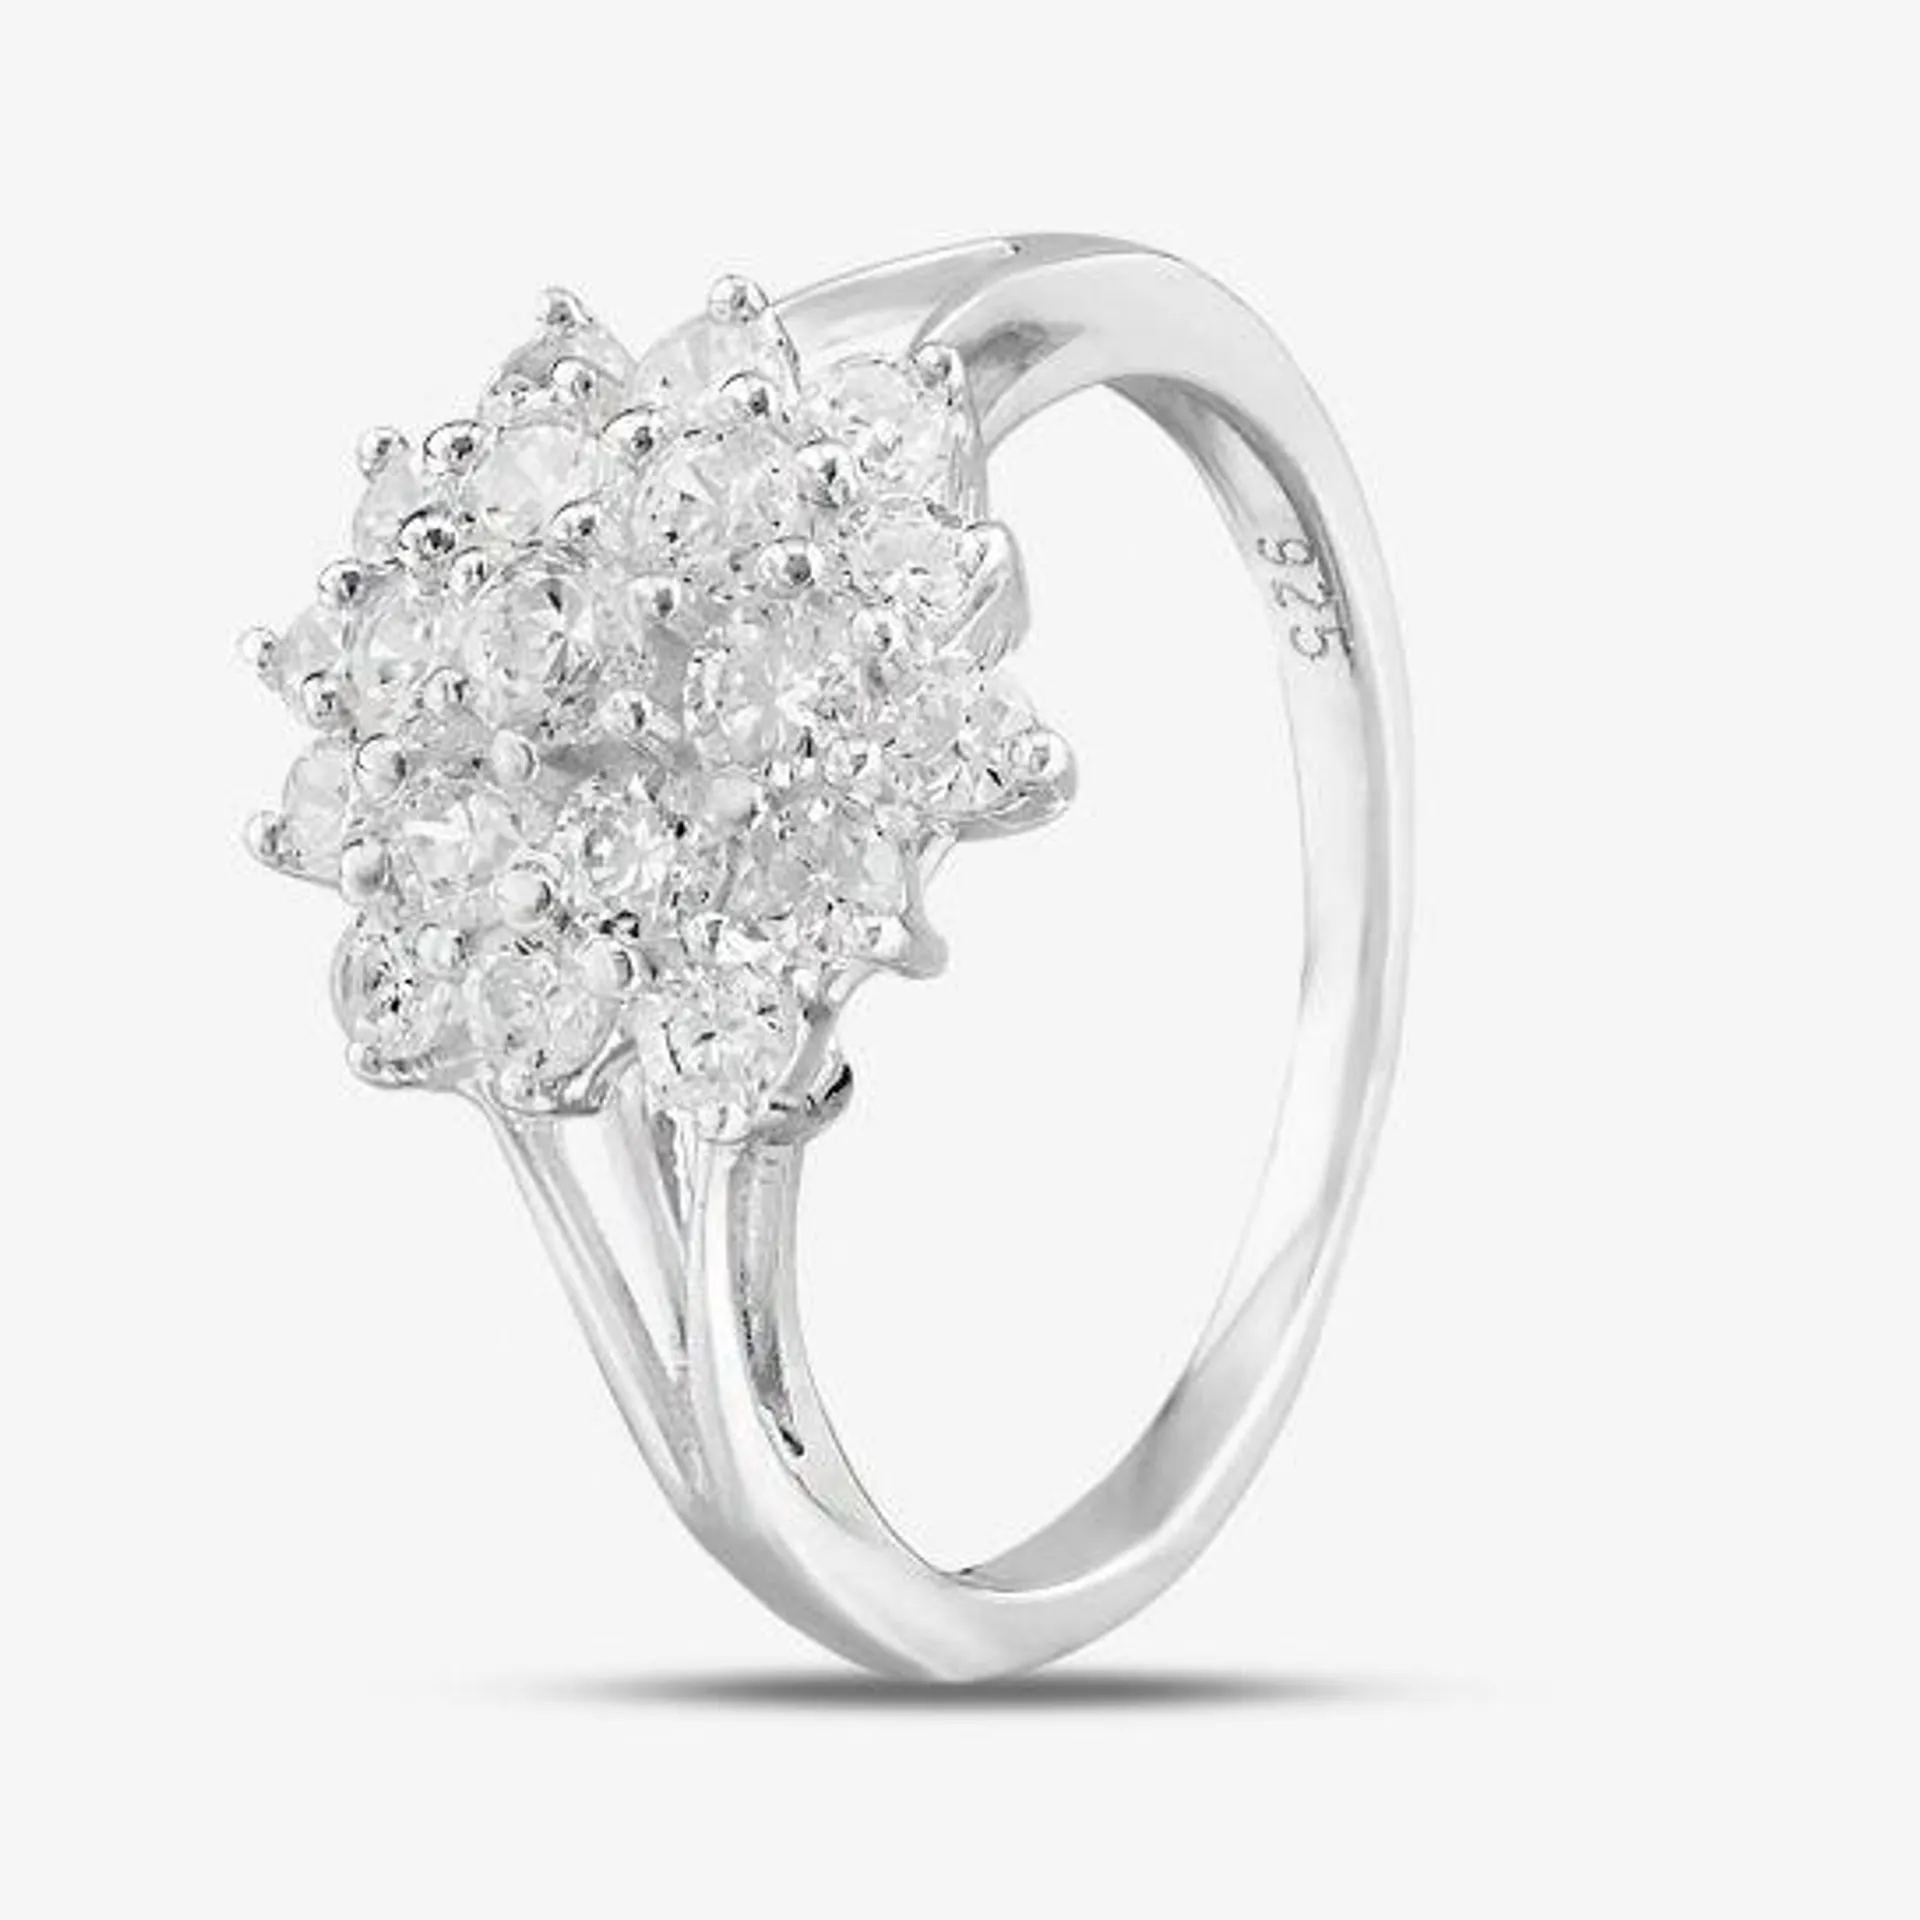 Sterling Silver & Cubic Zirconia Flower Cluster Ring DPR3598SIL